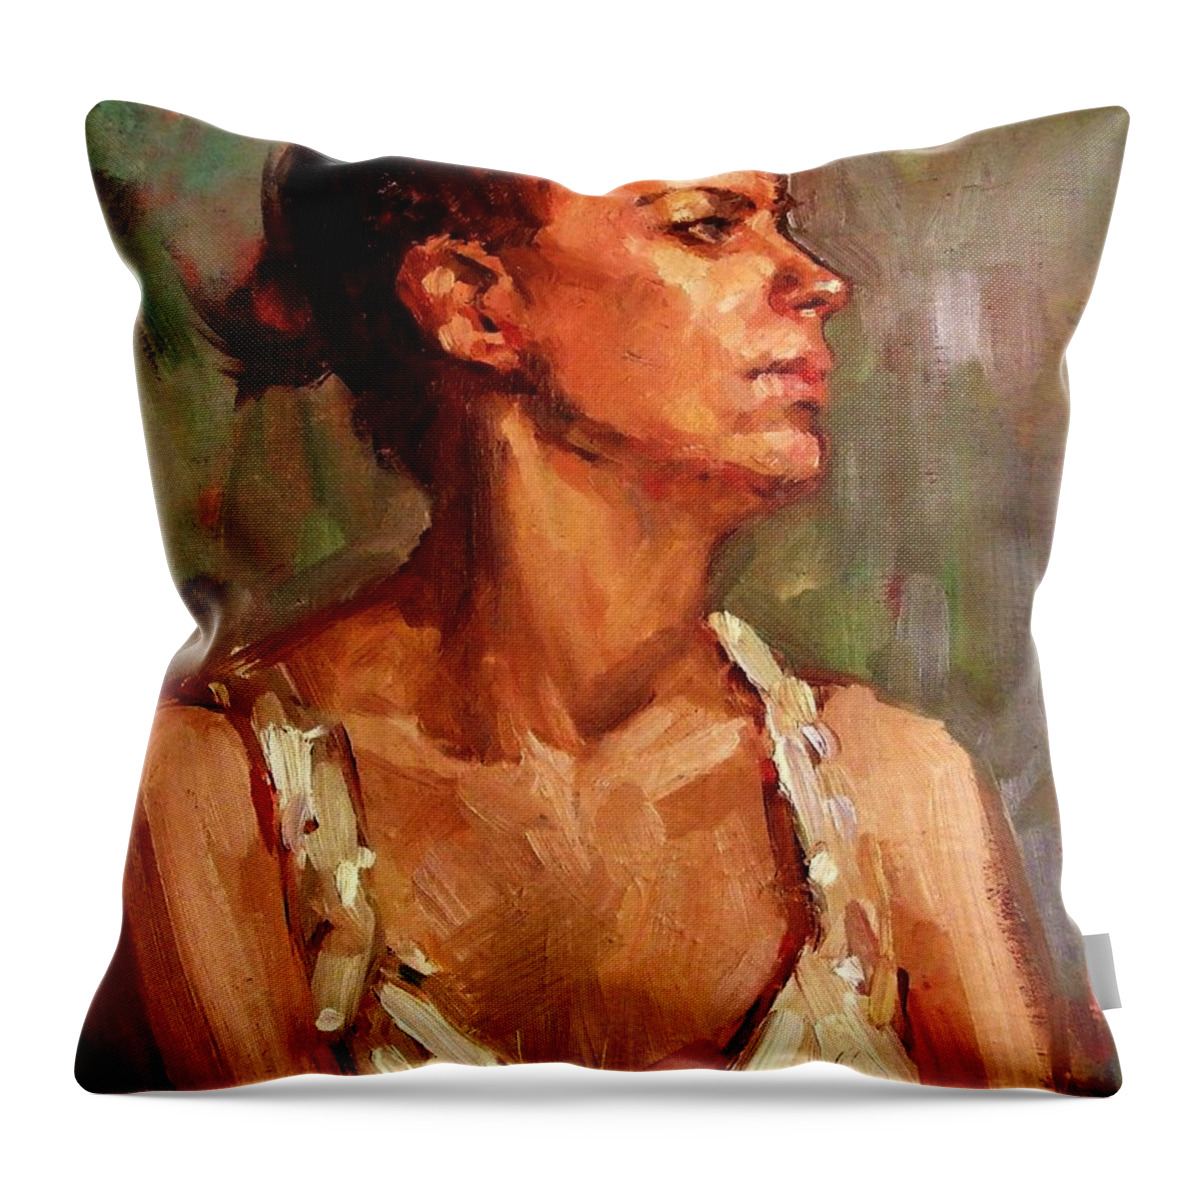 Female Portrait Throw Pillow featuring the painting Portrait of a Stern and Distanced Hardworking Woman in Light Summer Dress with Deep Shadows Dramatic by M Zimmerman MendyZ